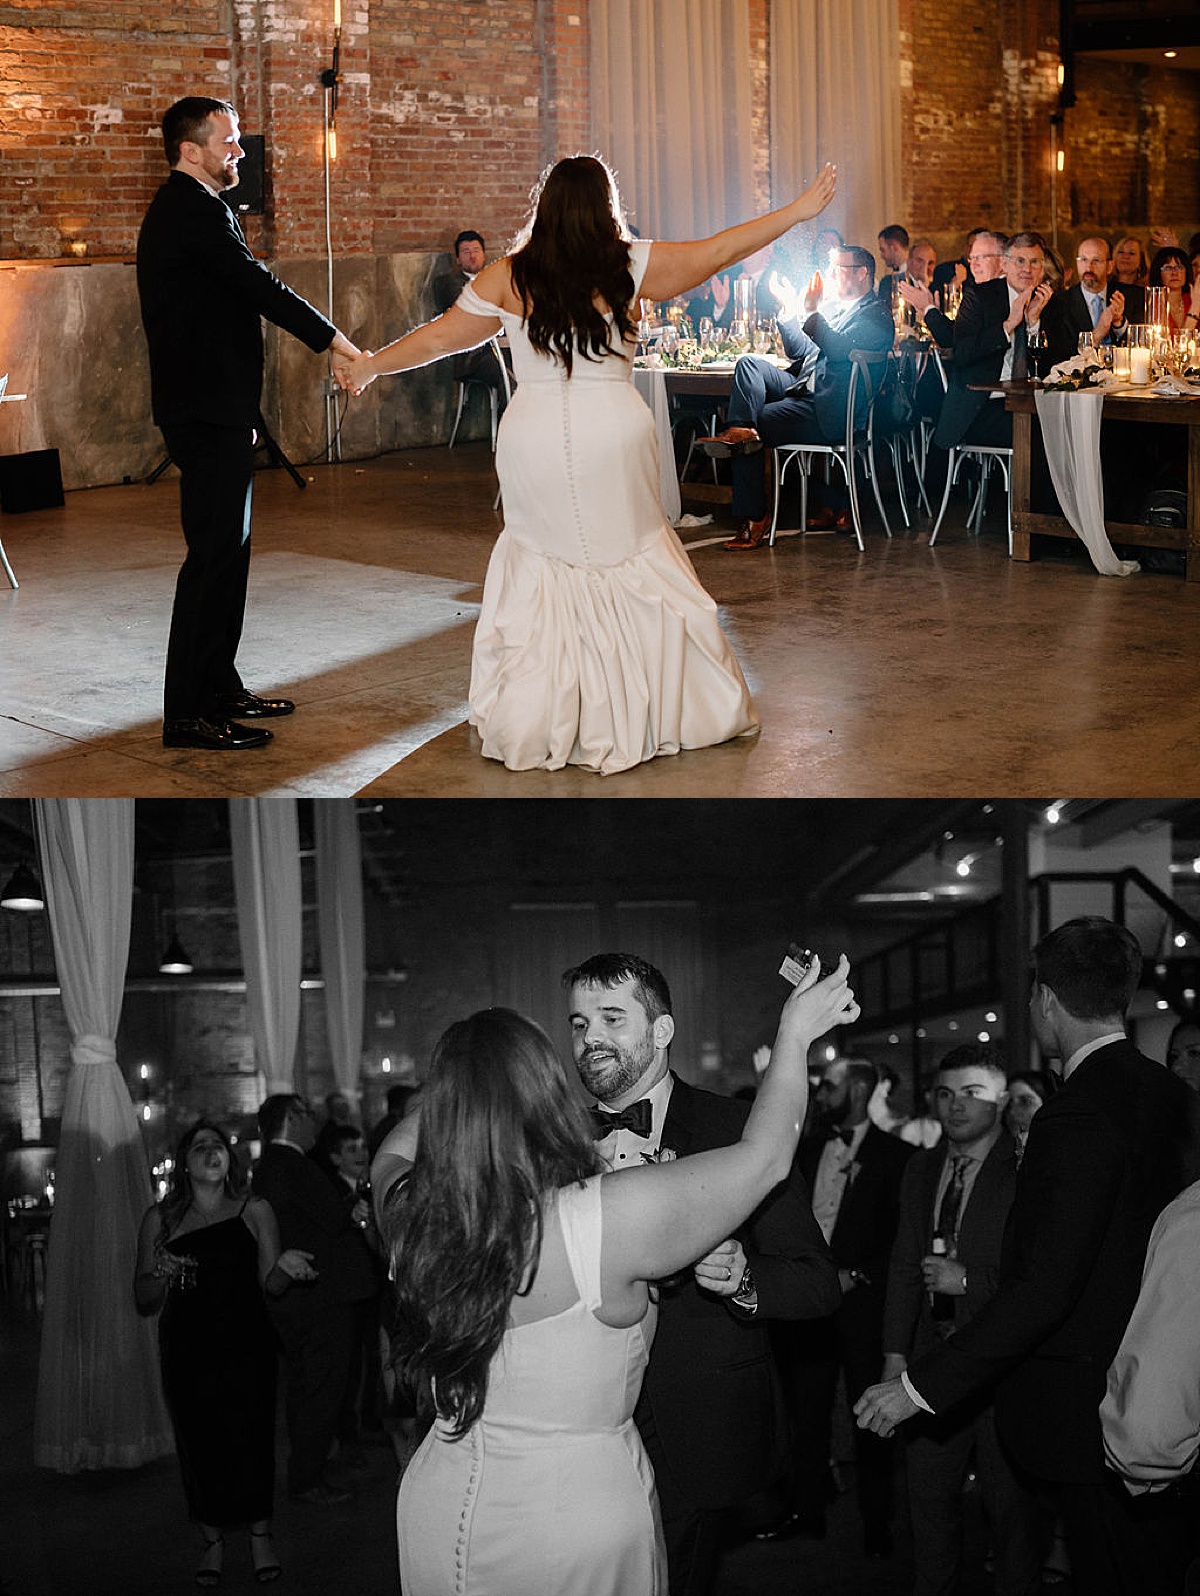 bride with bustled wedding gown dances with her groom at happy reception shot by Indigo Lace Collective